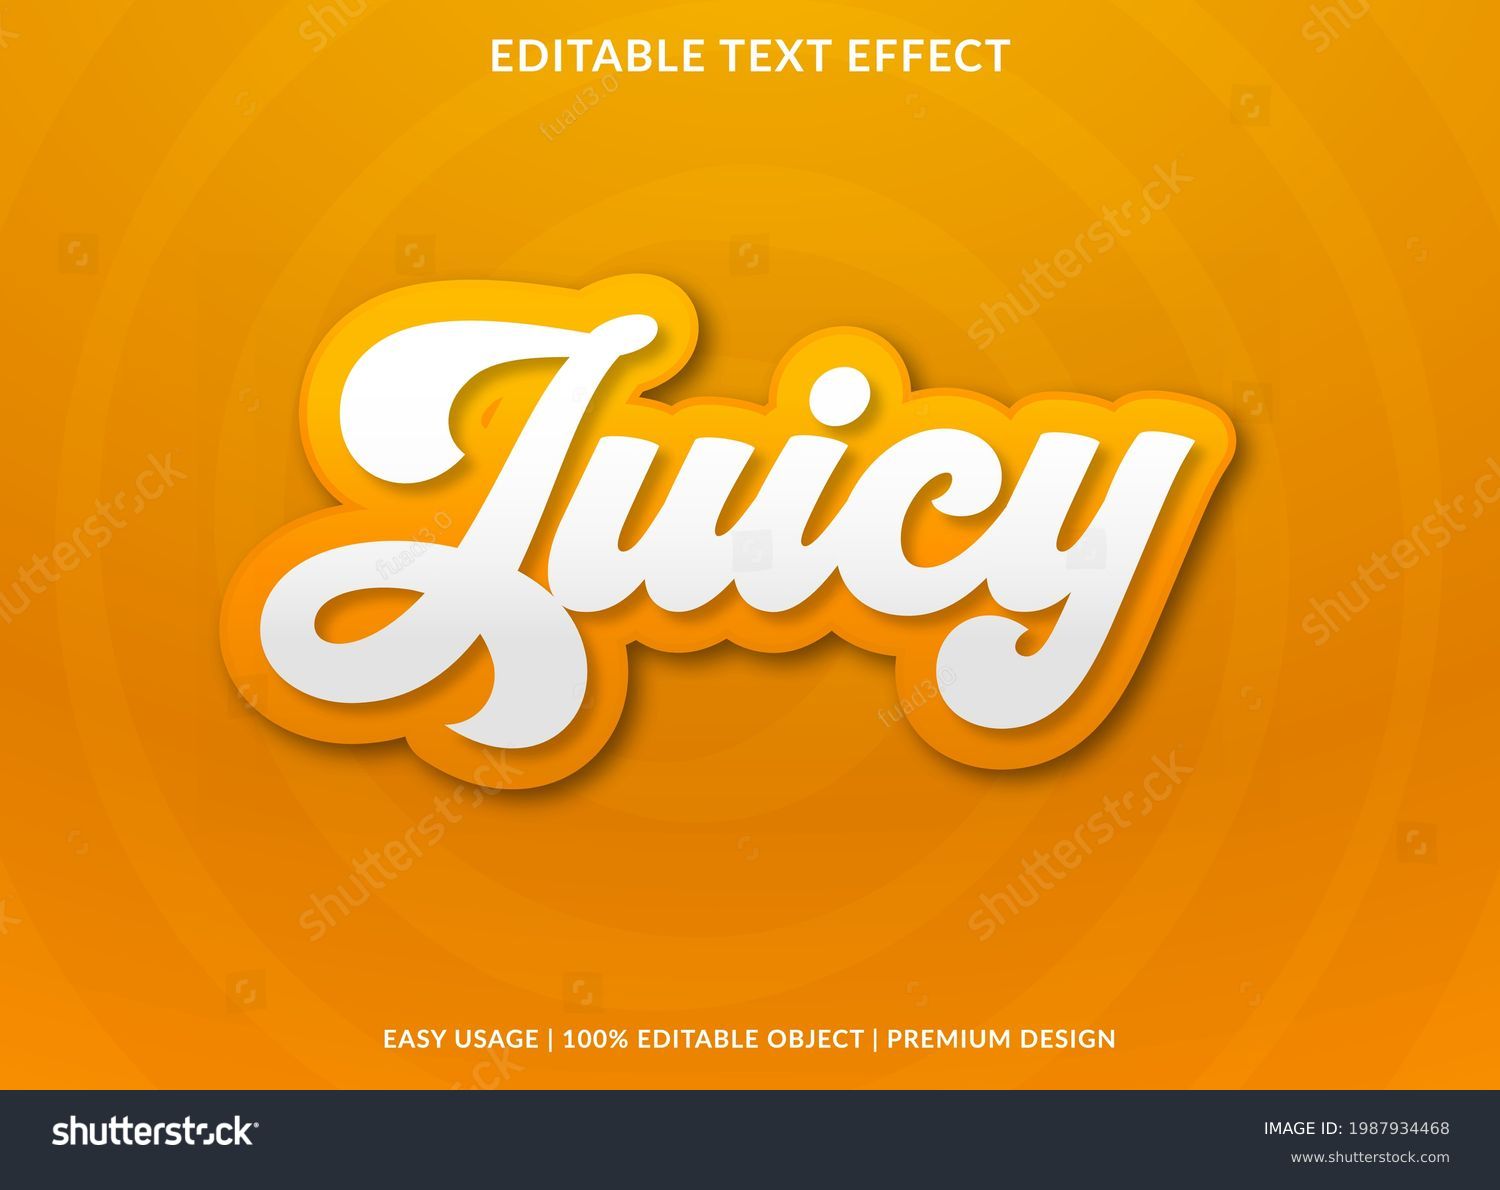 juicy text effect template with abstract style use for business logo and brand #1987934468